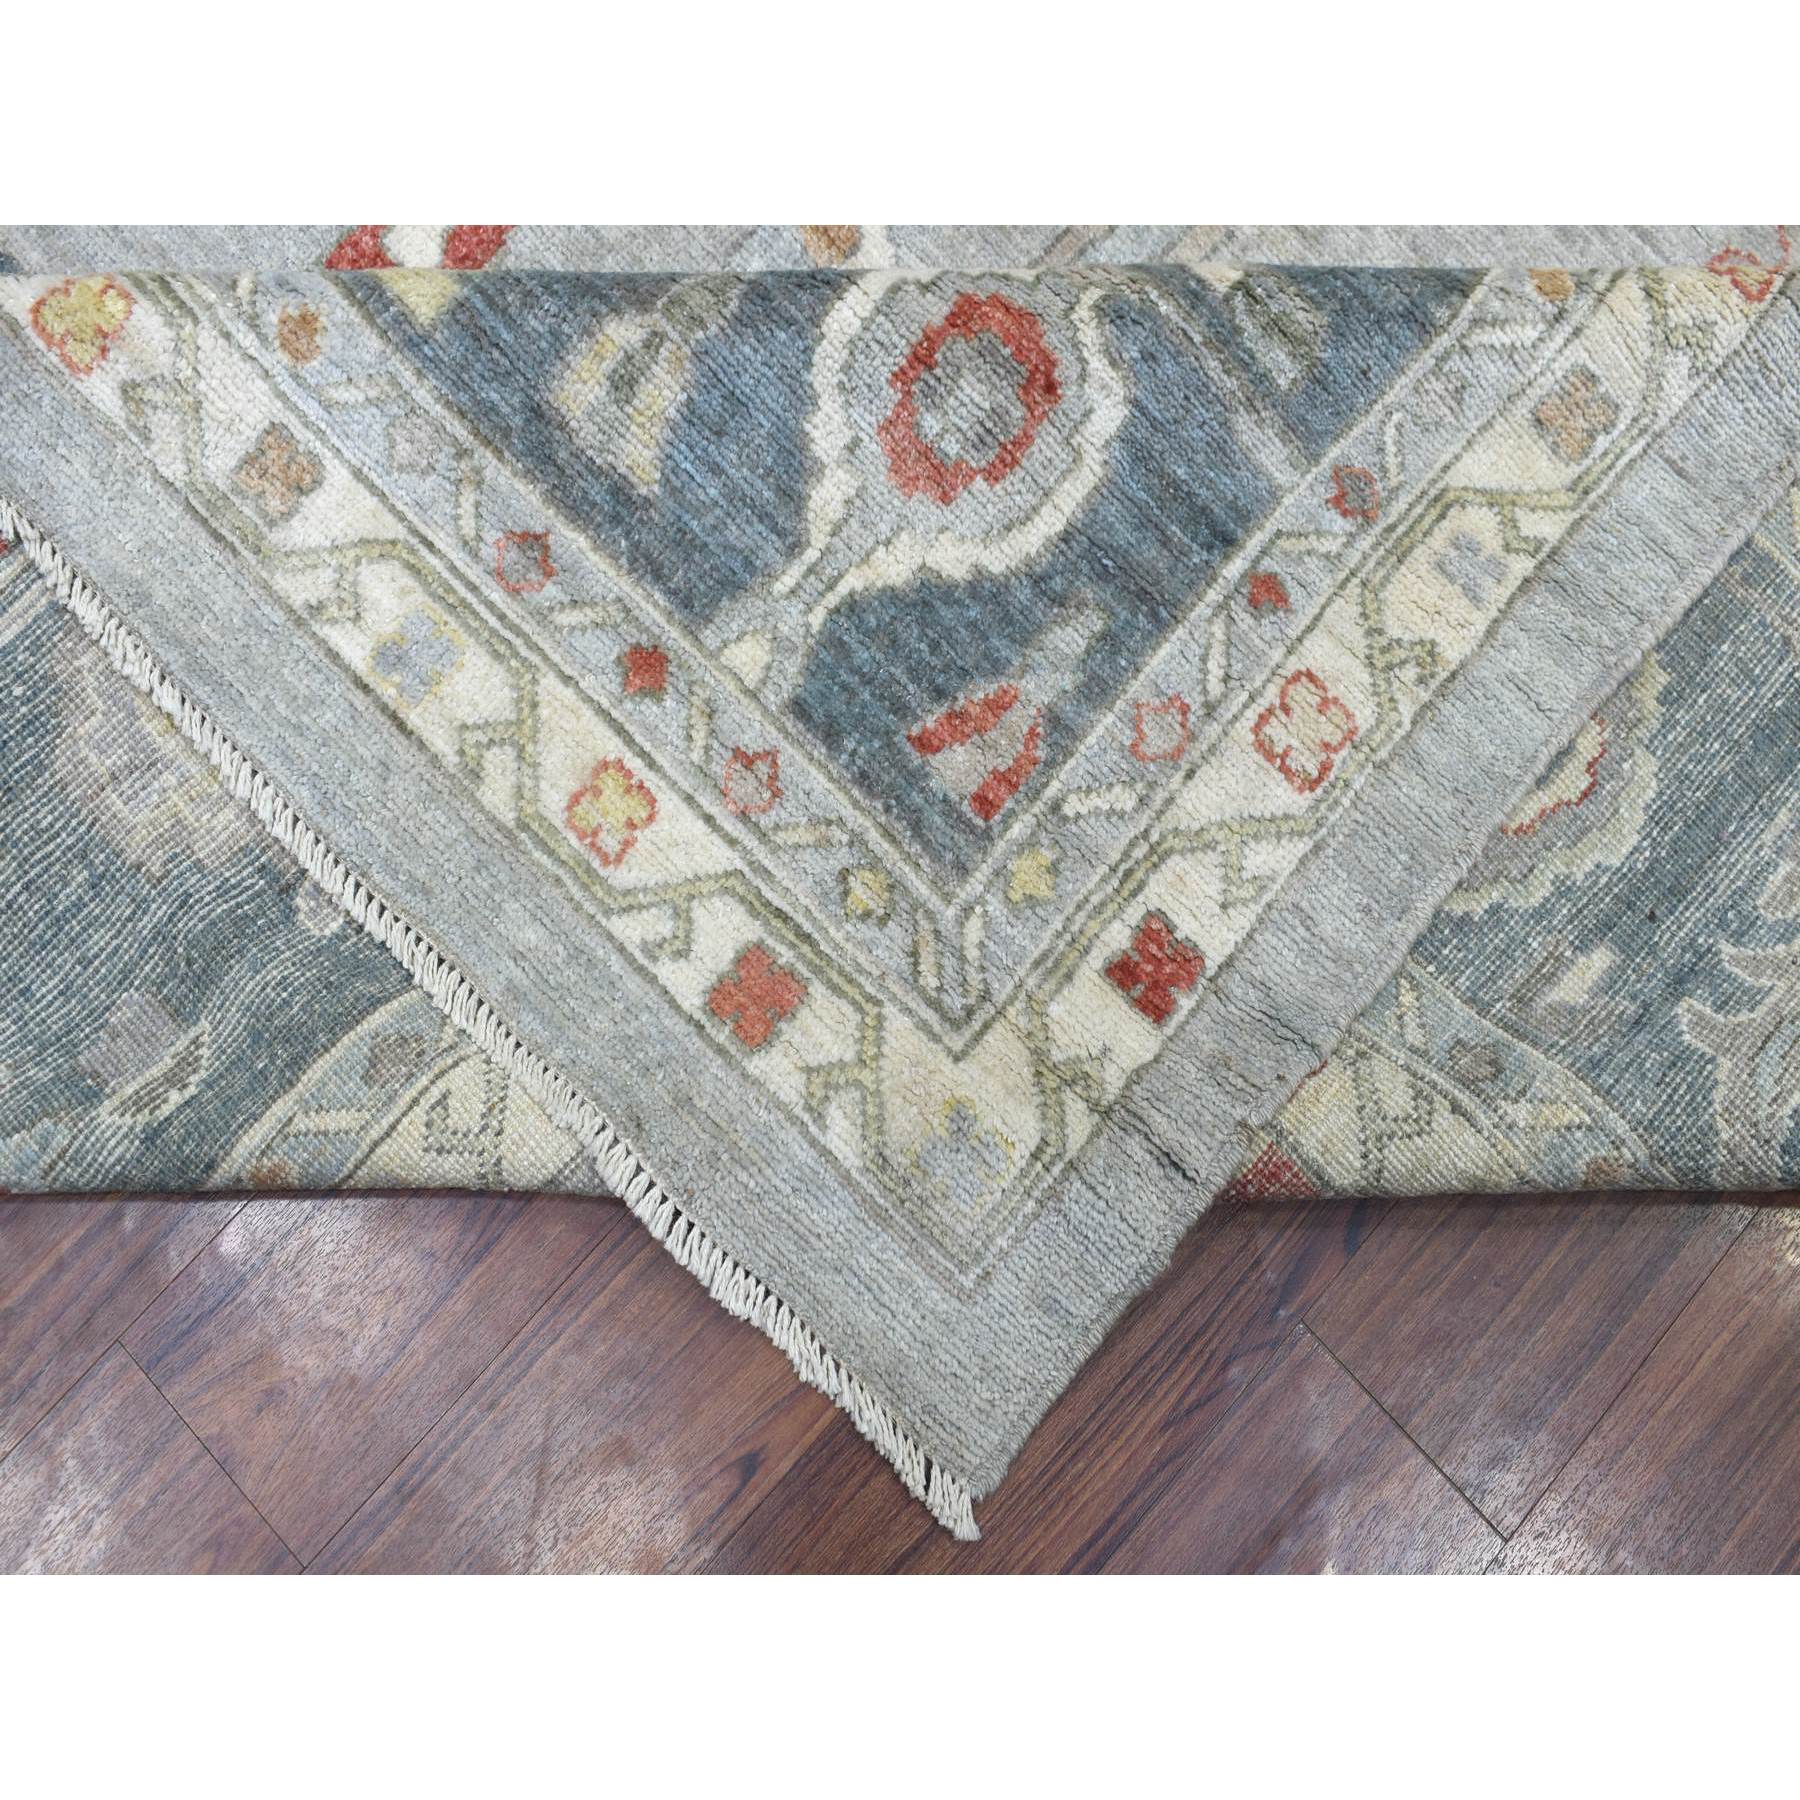 13'9"x13'9" Hand Woven Gray Afghan Angora Oushak with Flowing and Open Design, Plush Comfort Natural Wool Oriental Square Rug 